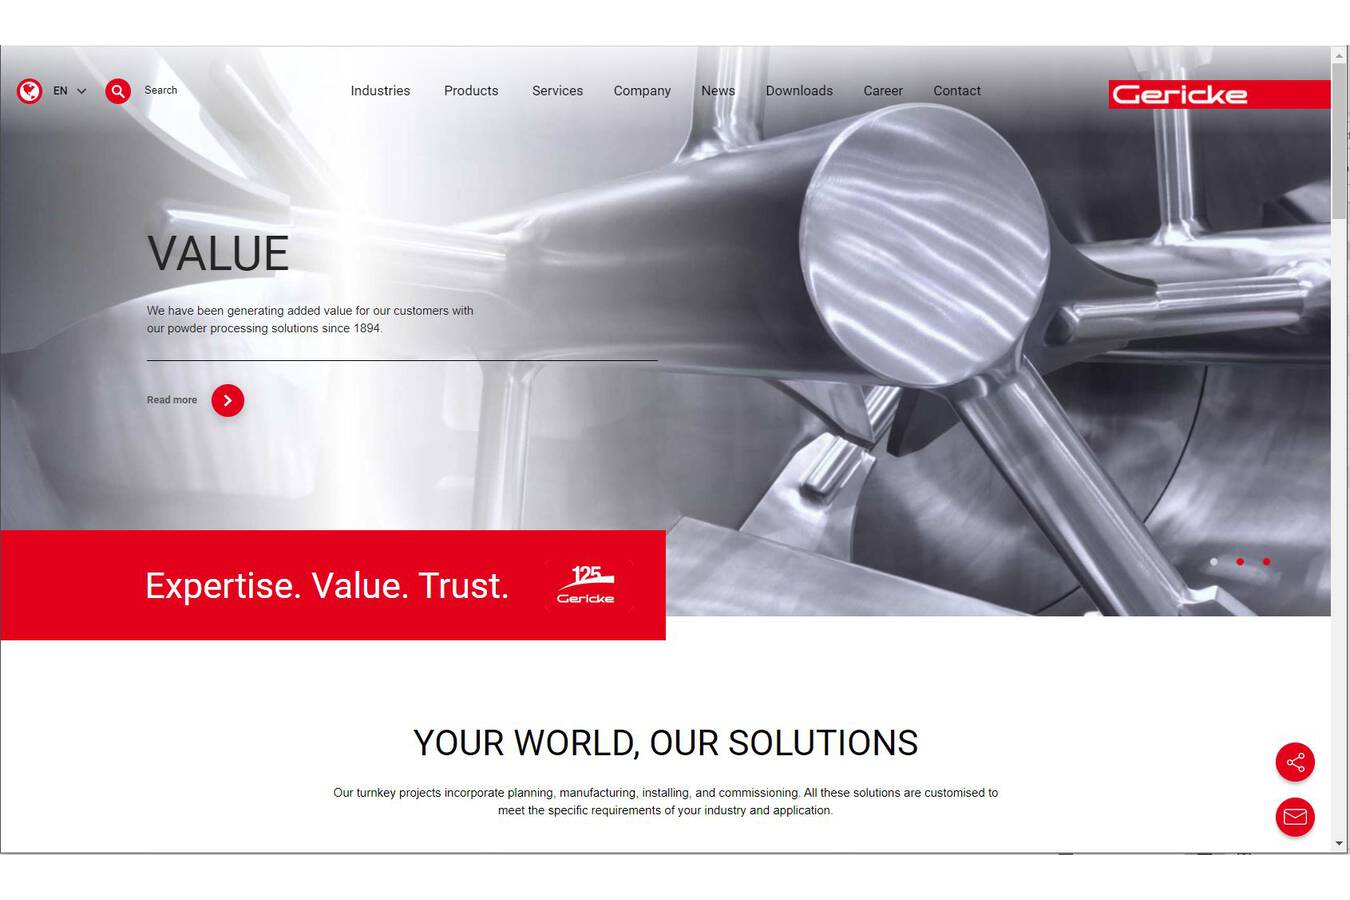 New Gericke Website – Powder and beyond With its new website, Gericke opens a big window into the world of powder processing, handling and services